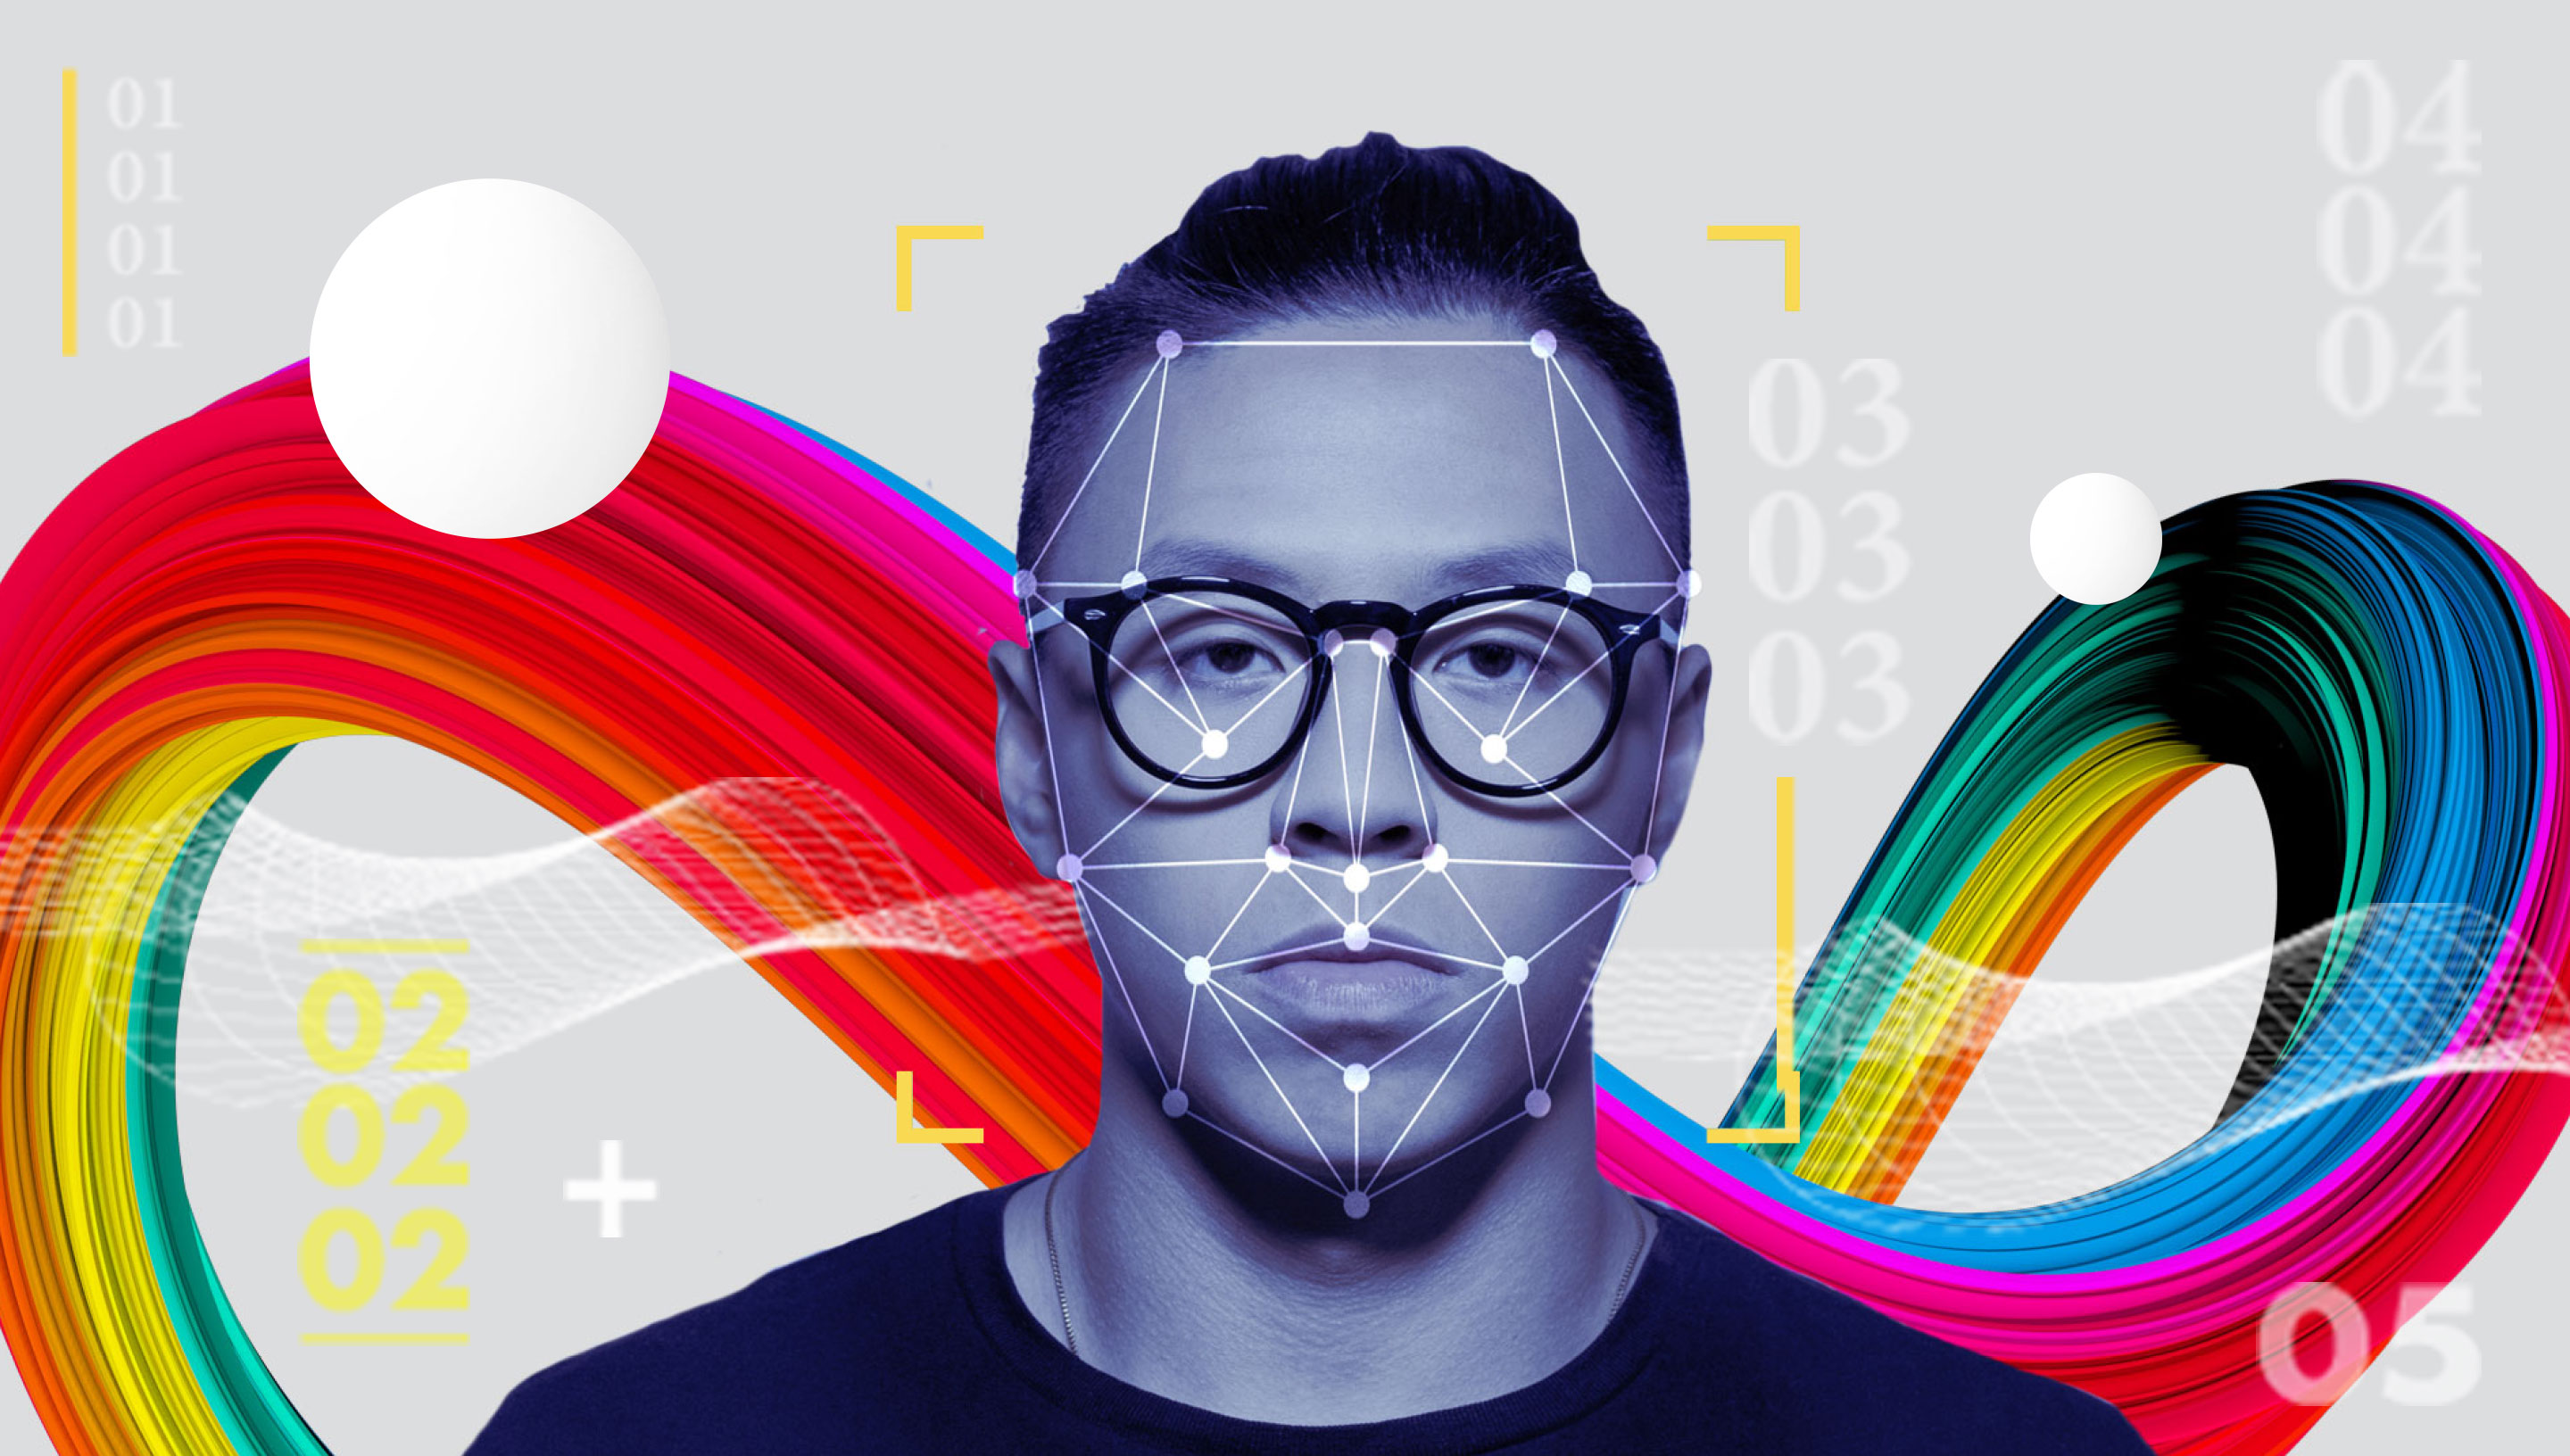 Portrait of man with glasses in front of colorful abstract background